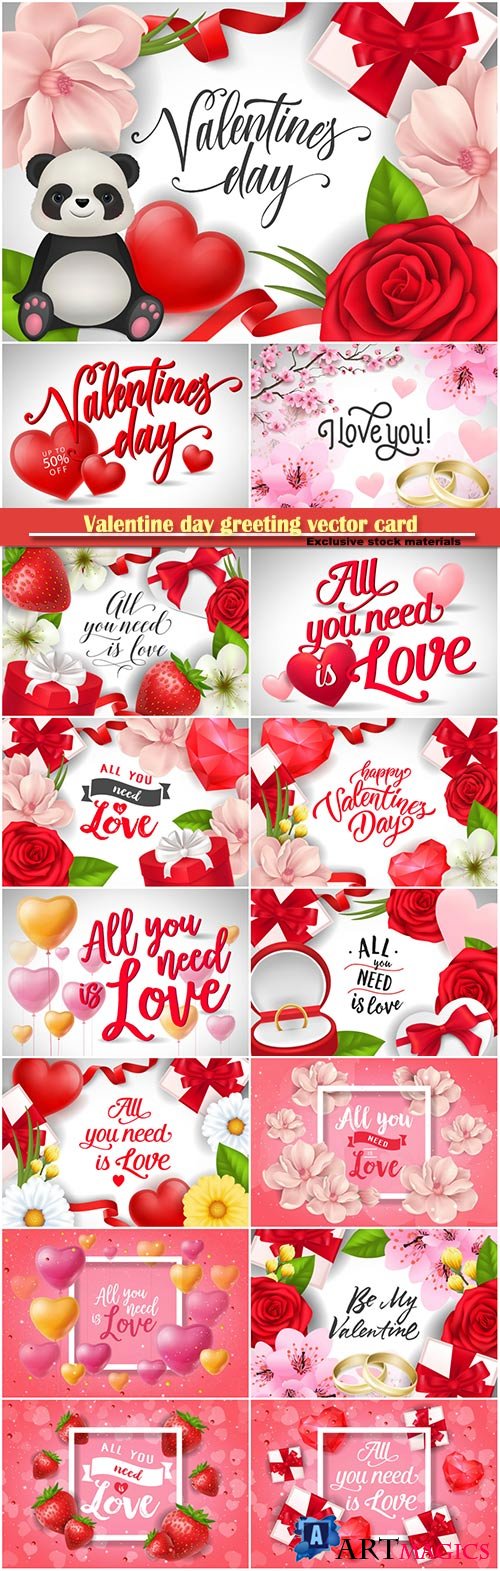 Valentine day greeting vector card, hearts i love you # 24